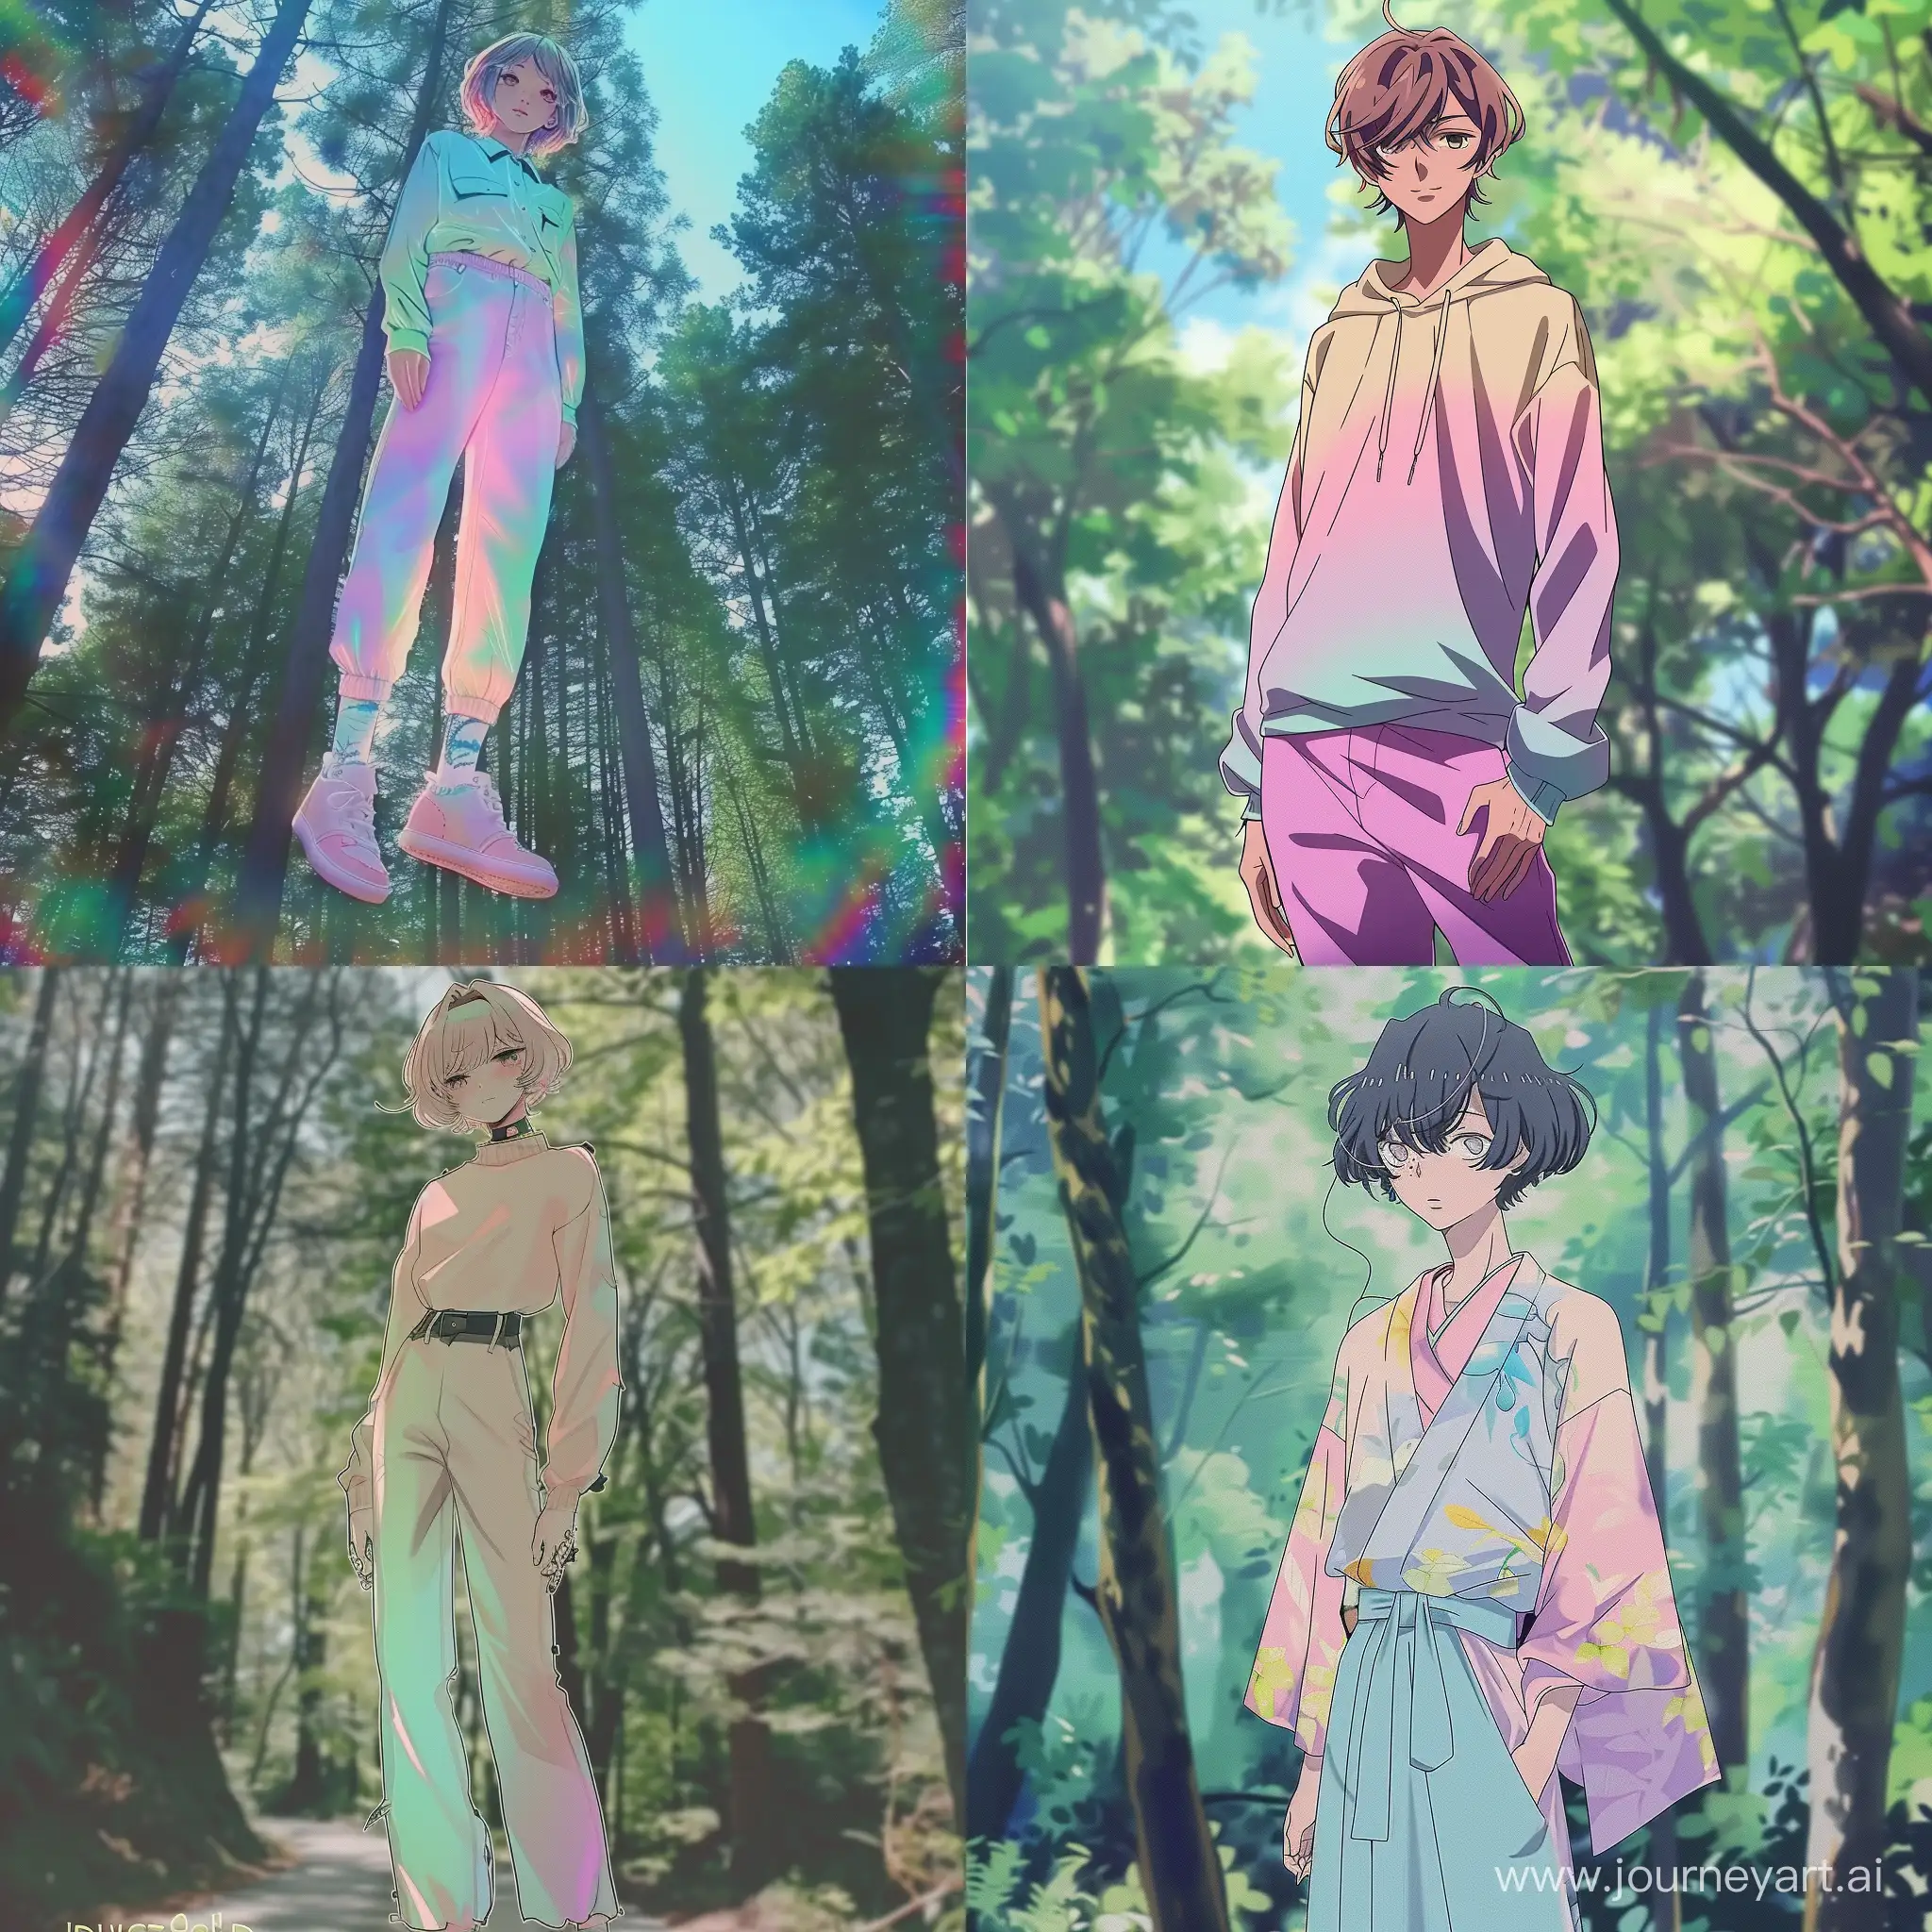 Enigmatic-Tall-Anime-Character-in-Pastel-Outfit-Amidst-Forest